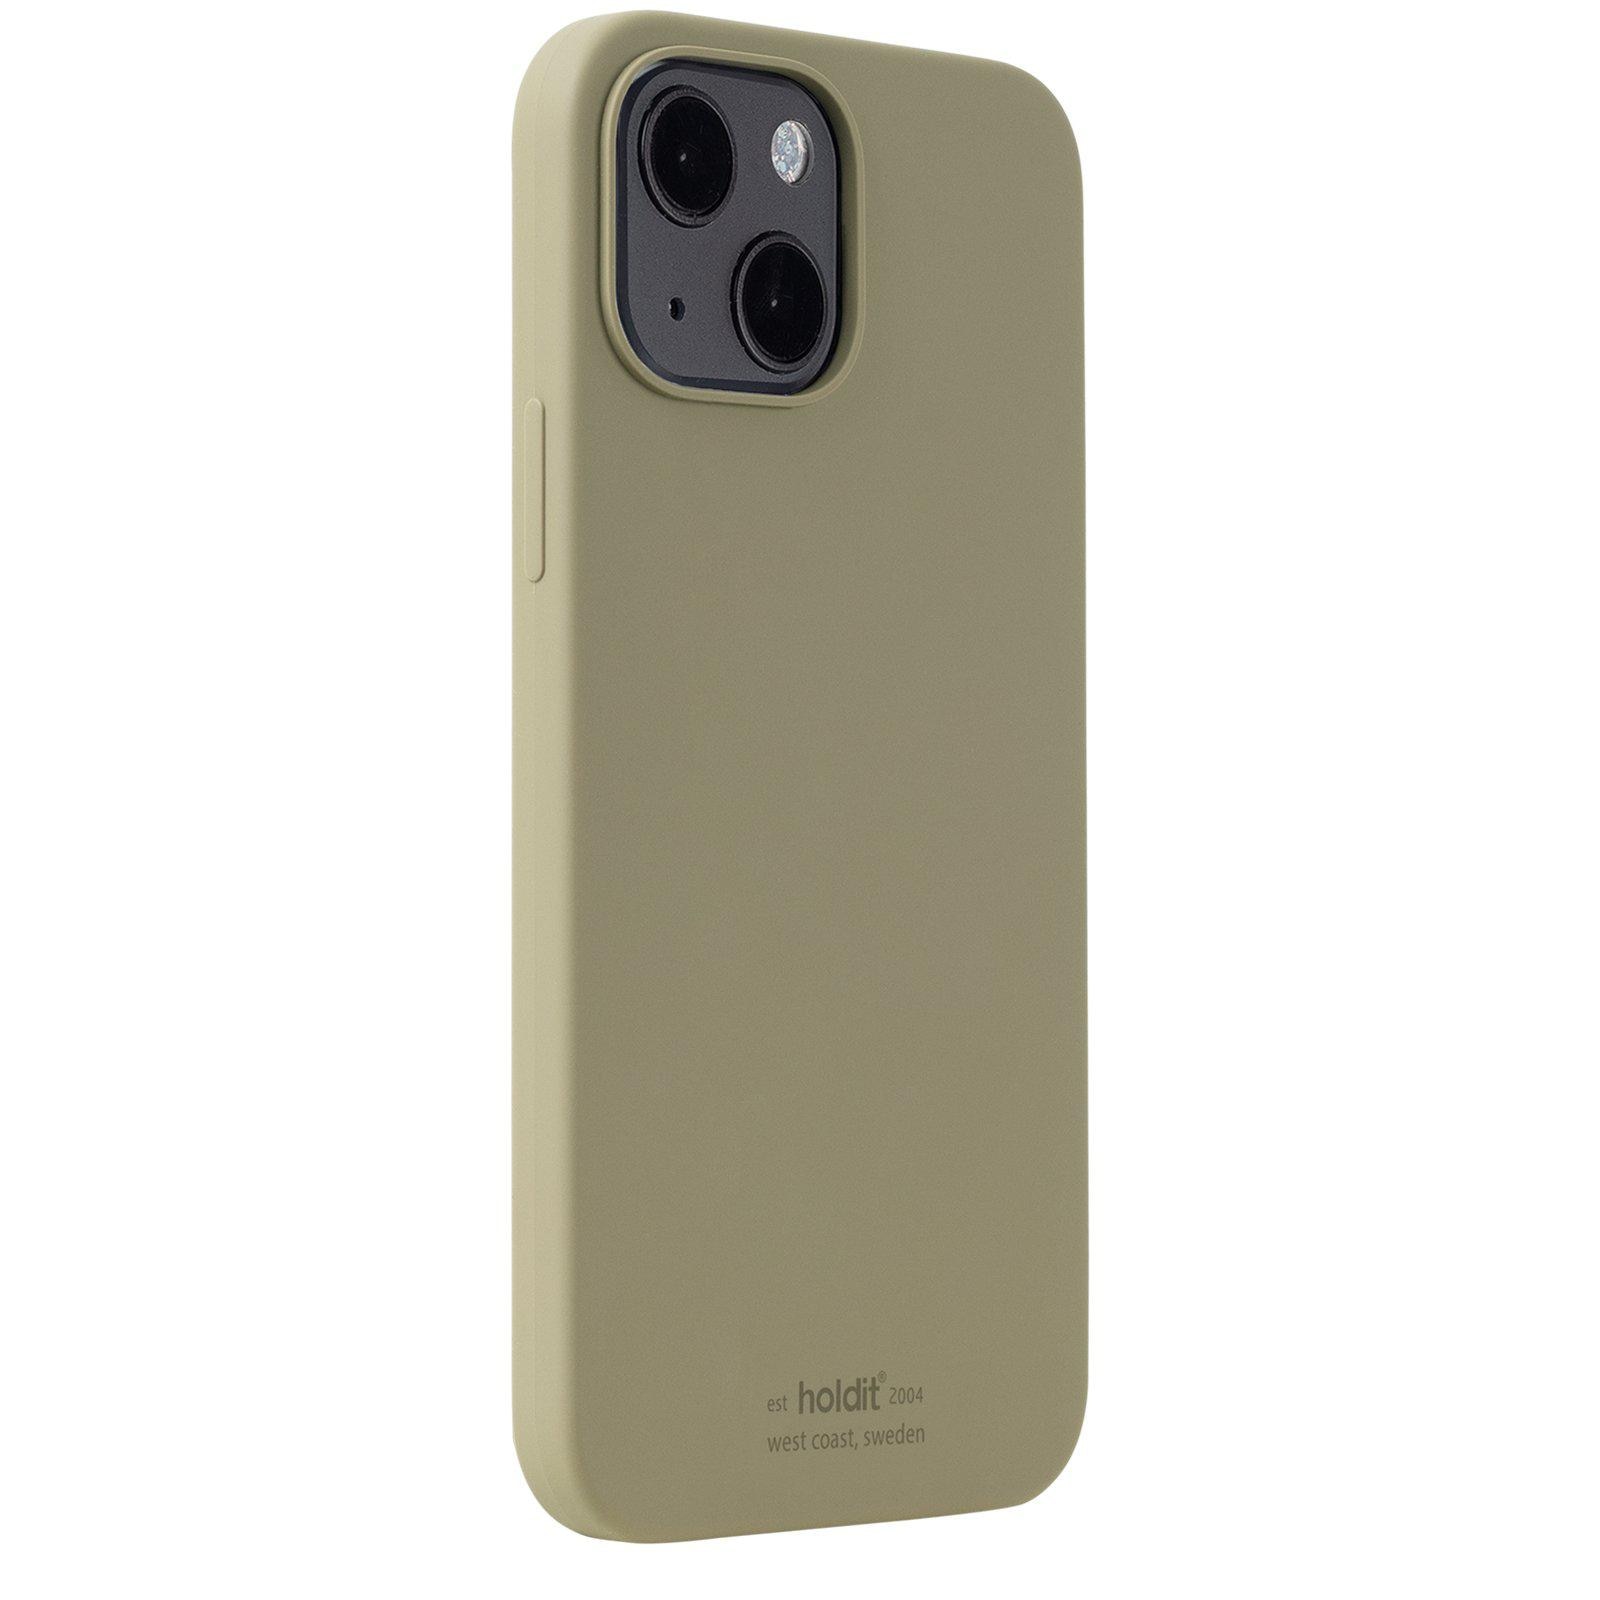 iPhone 13 Silicone Case Green